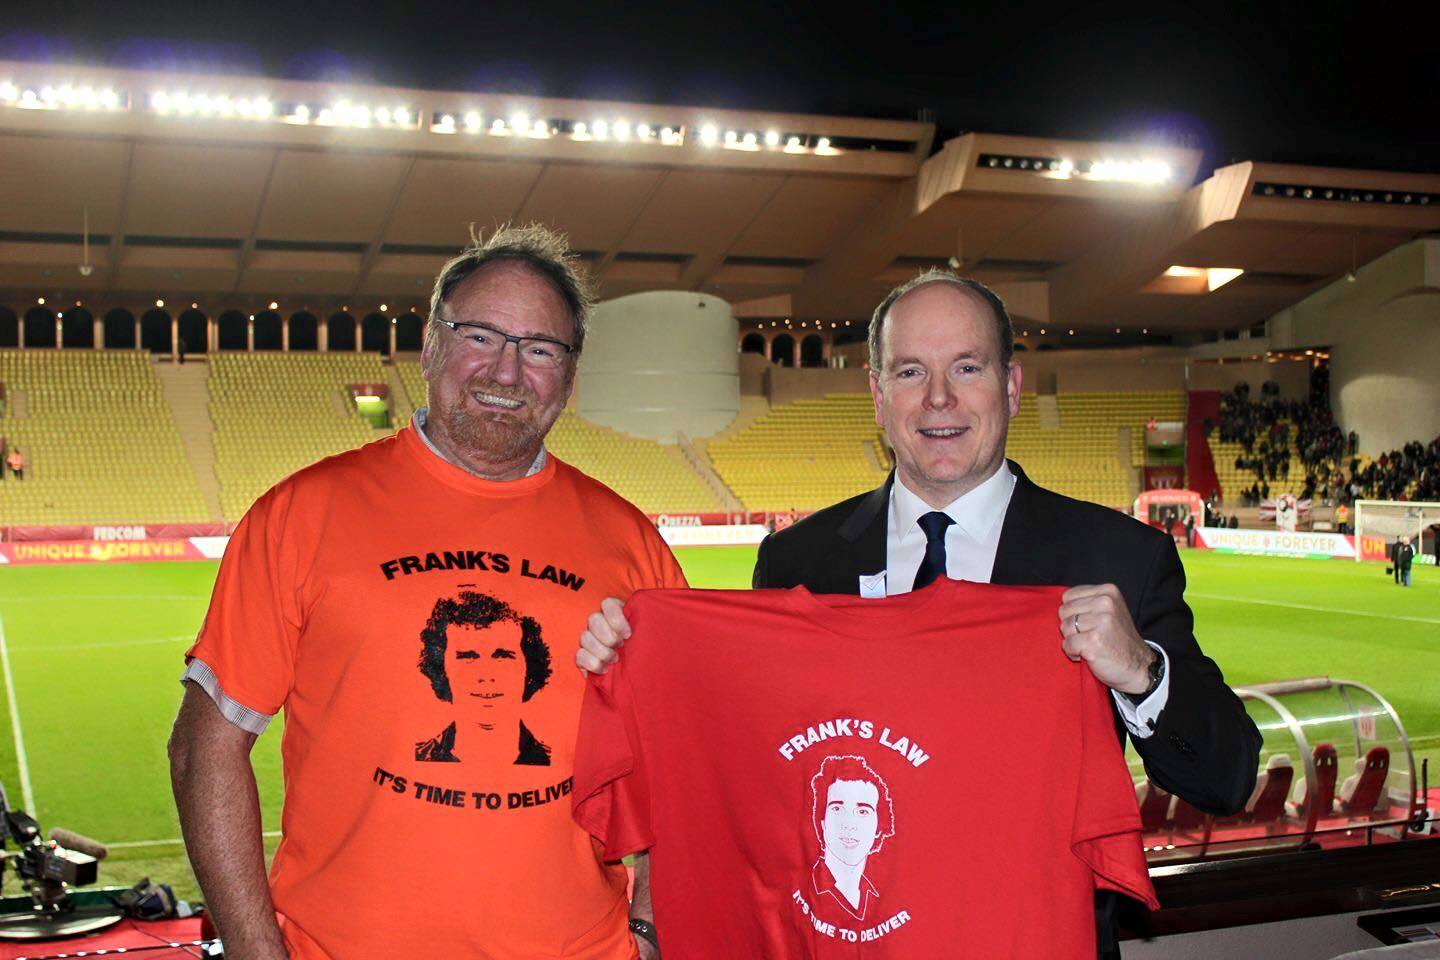 Prince Albert II (right) with his Frank's Law t-shirt and Rob Morrison at the Stade Louis II